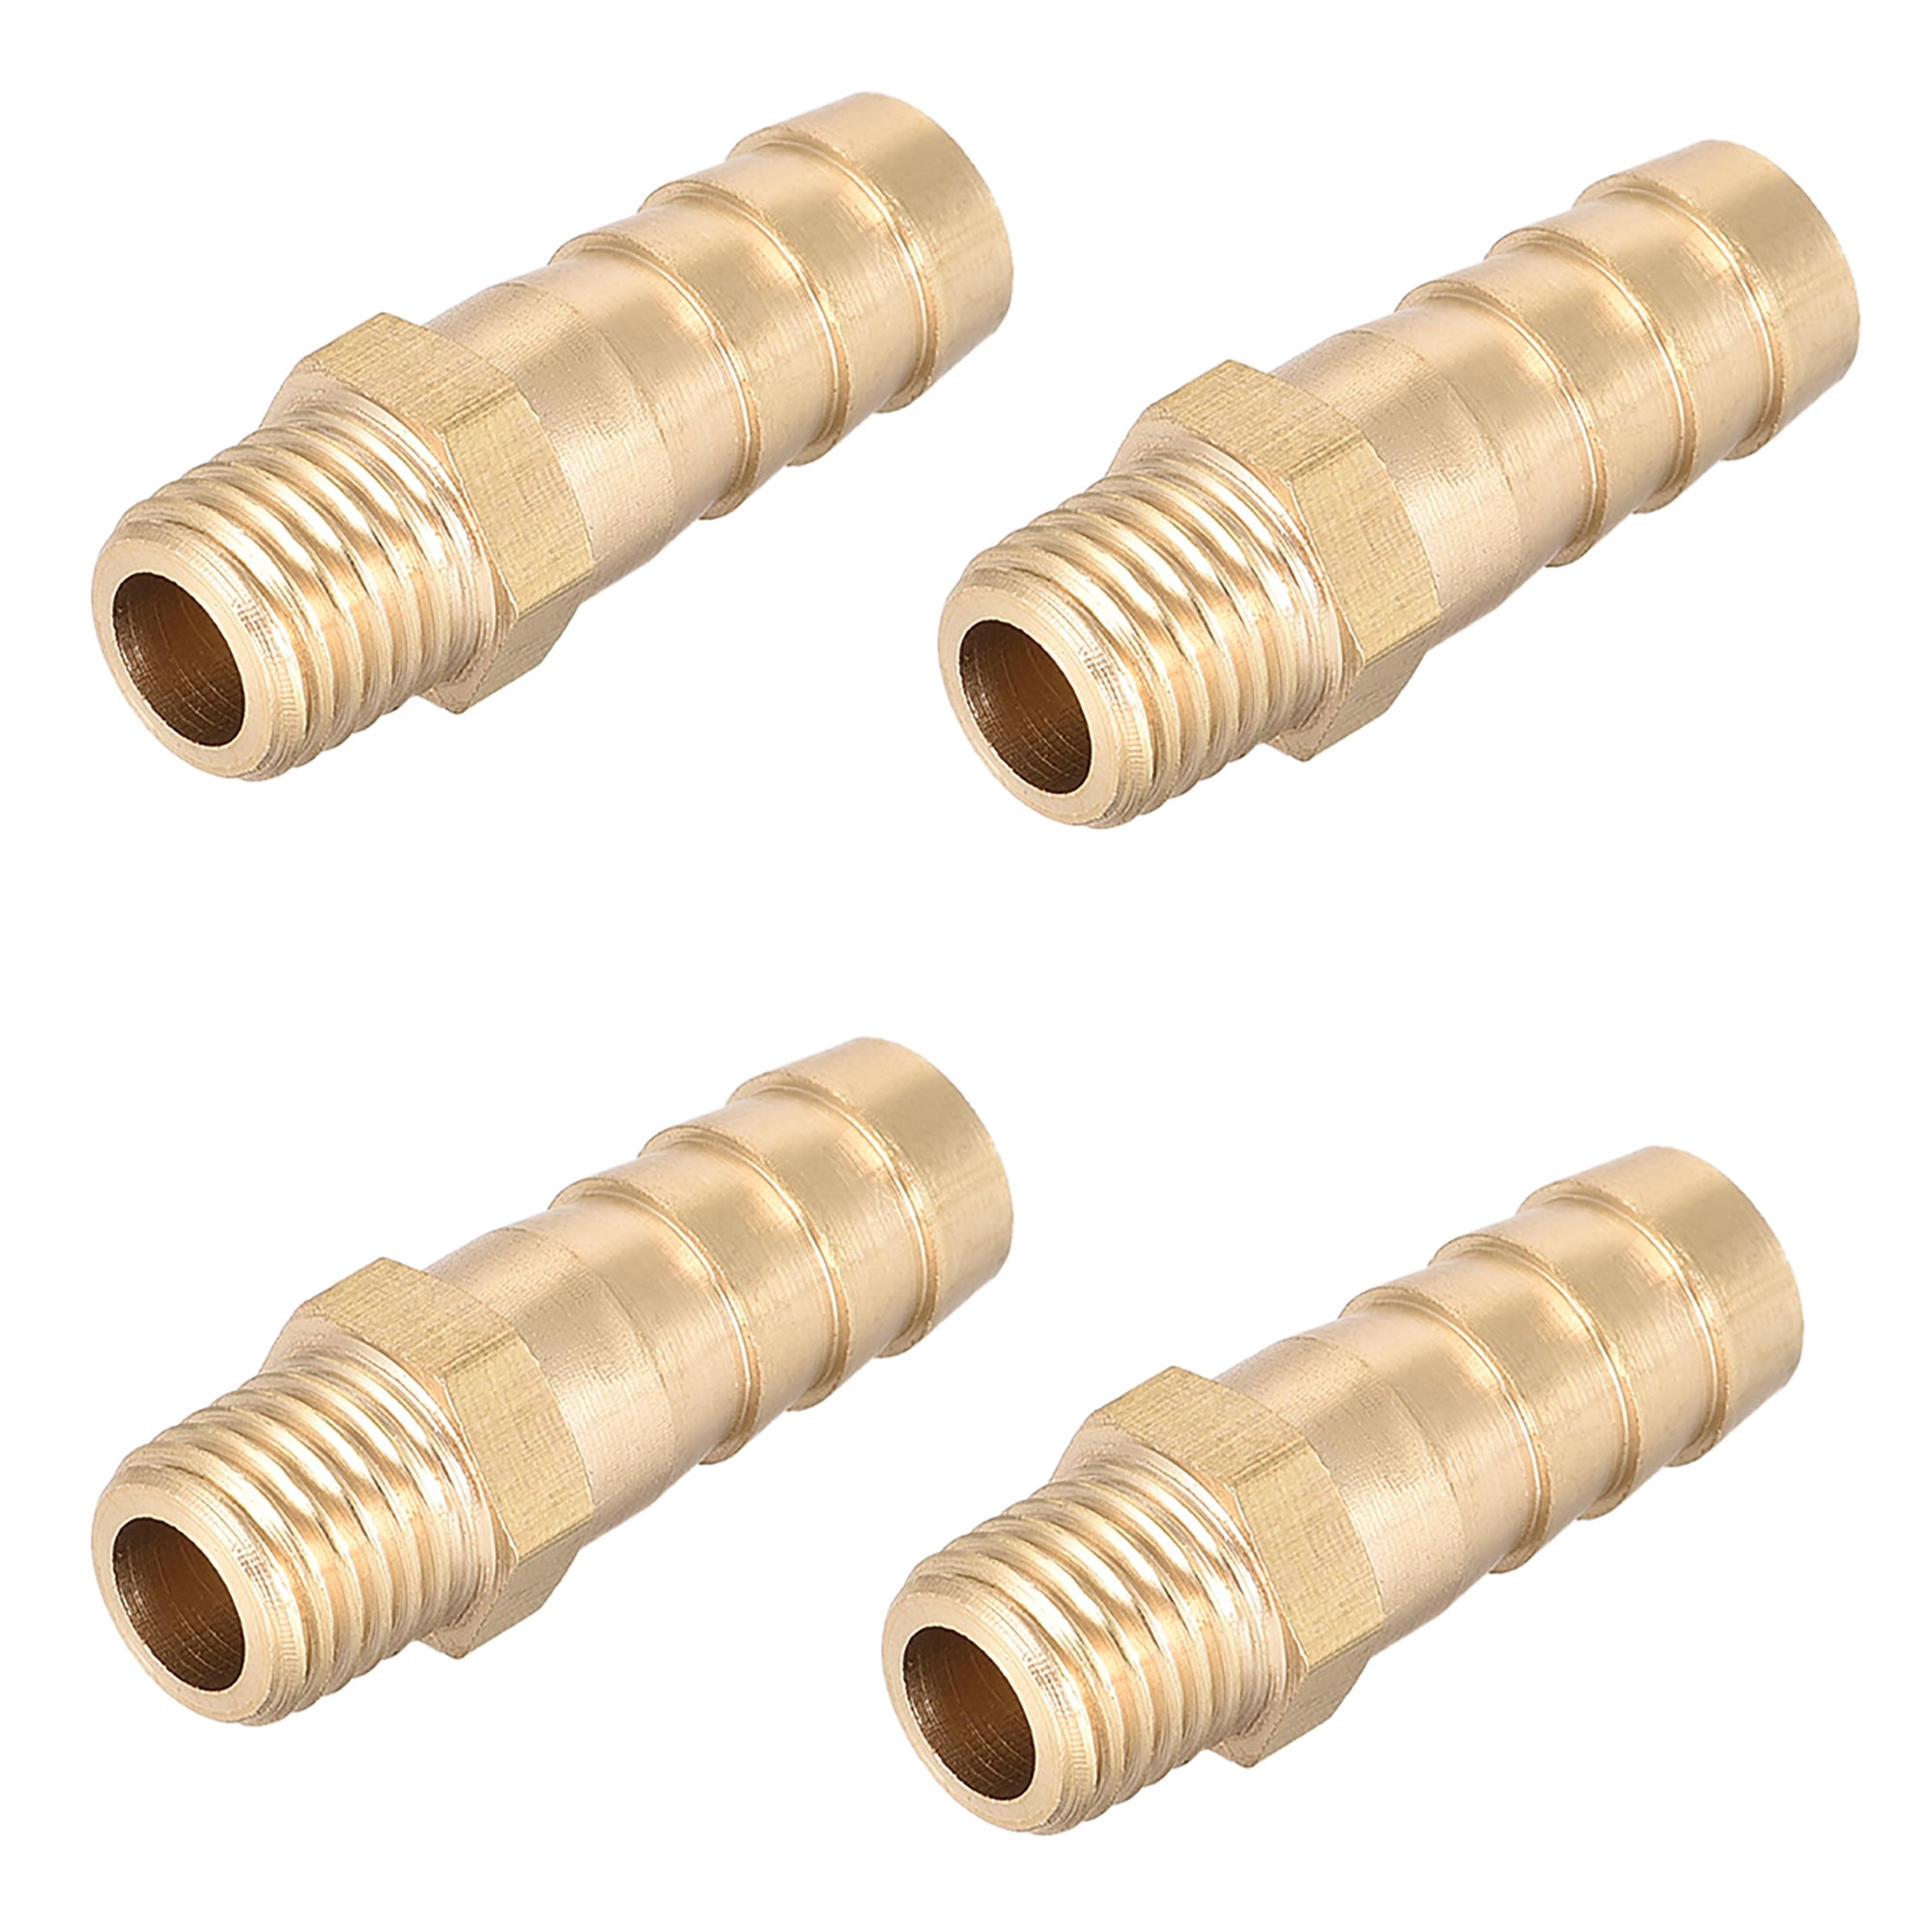 Brass Pipe Fitting Metric Adapter Connector 1/4" NPT Female x M10*1 Male 